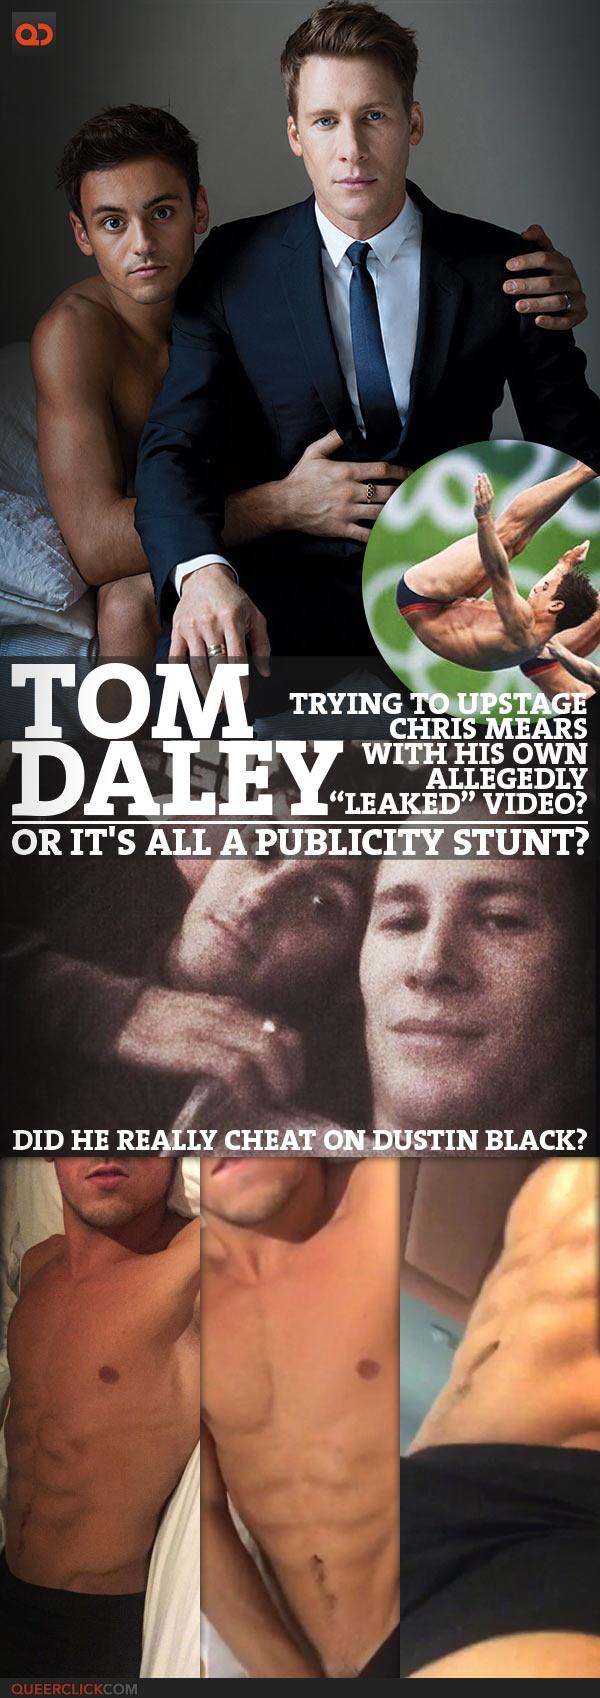 Is Tom Daley Trying To Upstage Chris Mears With His Own Allegedly “Leaked” Video Or It's All A Publicity Stunt?